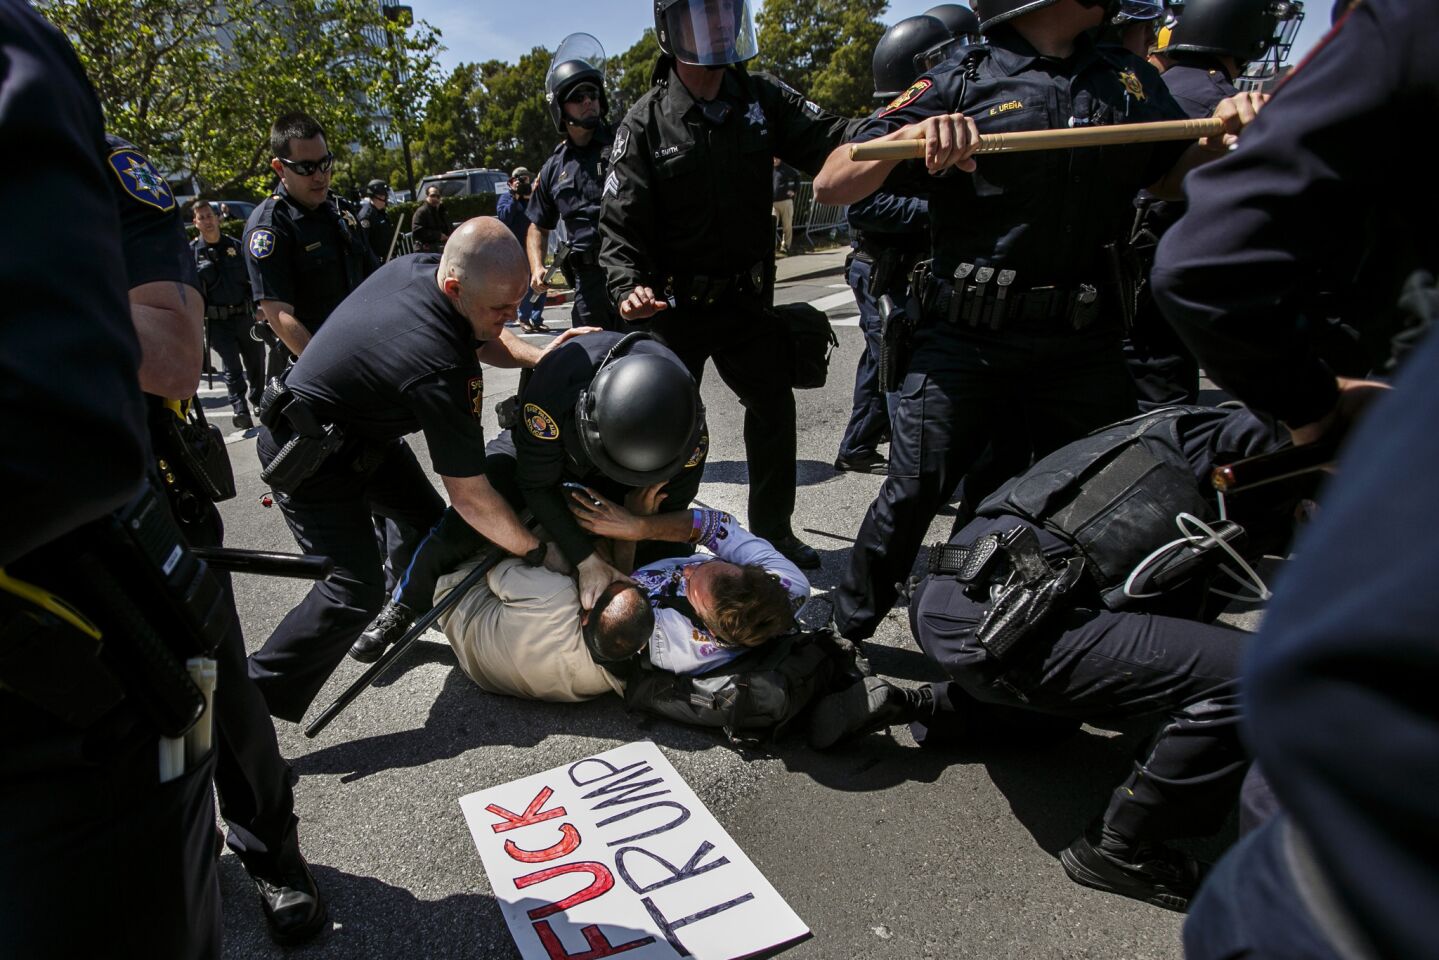 Protesters clash with police outside the hotel hosting the California Republican Convention in Burlingame on April 29, 2016.